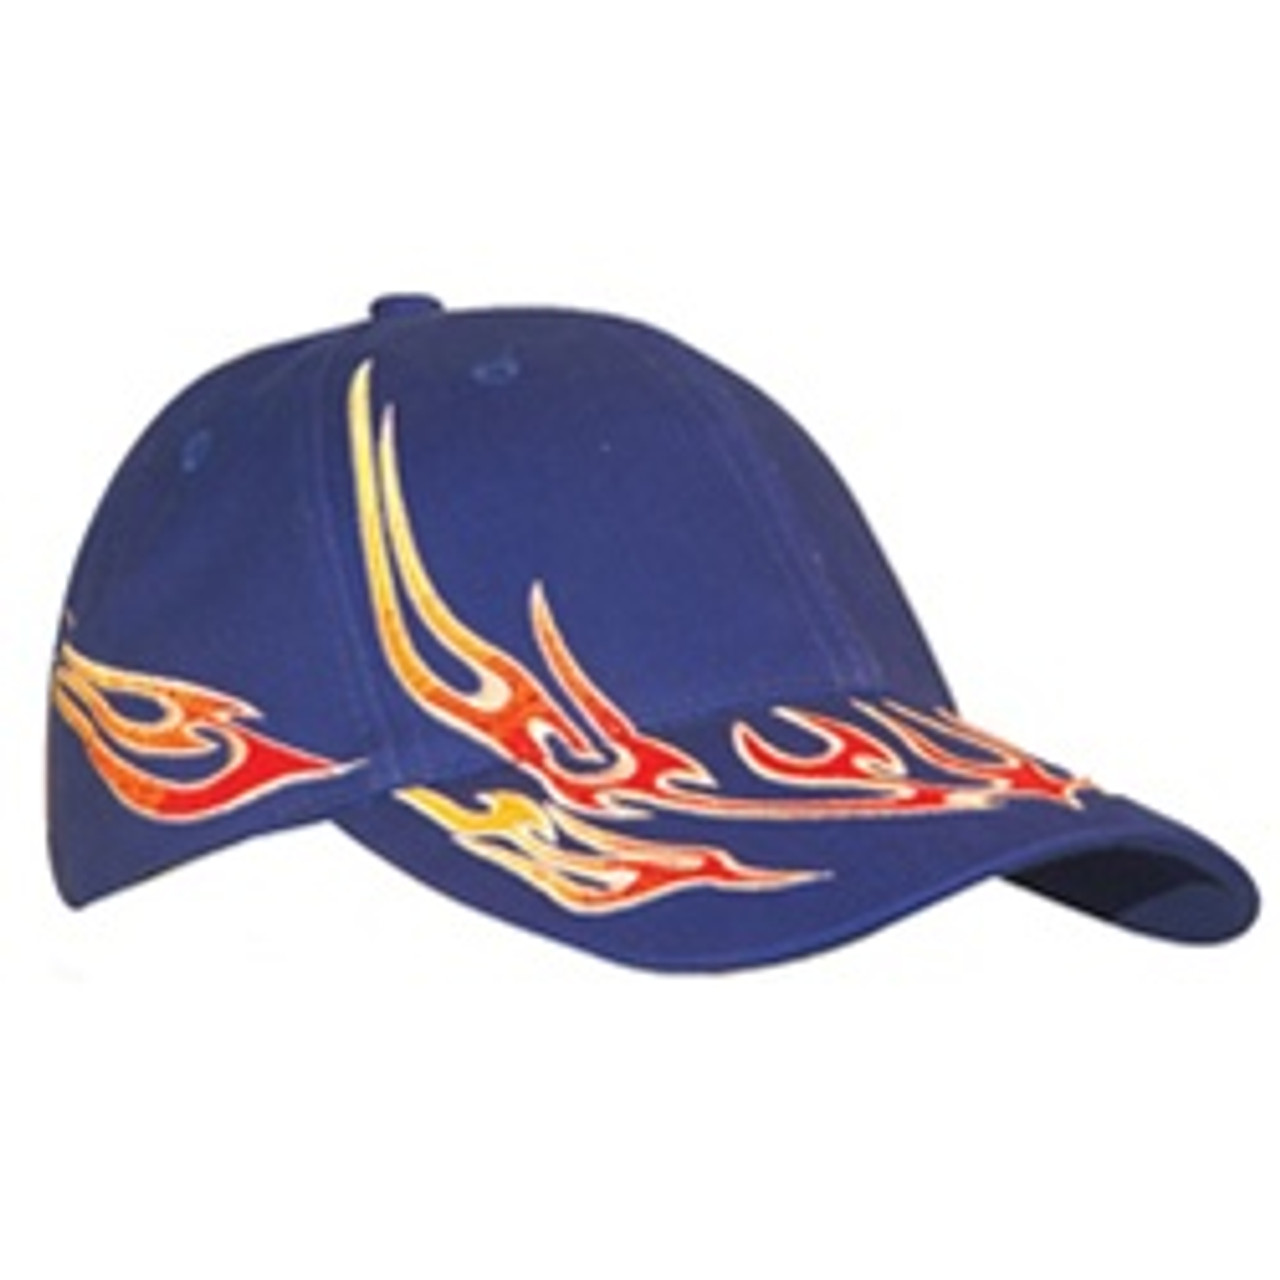 Custom Royal with Yellow Flame Predecorated Racing Cap